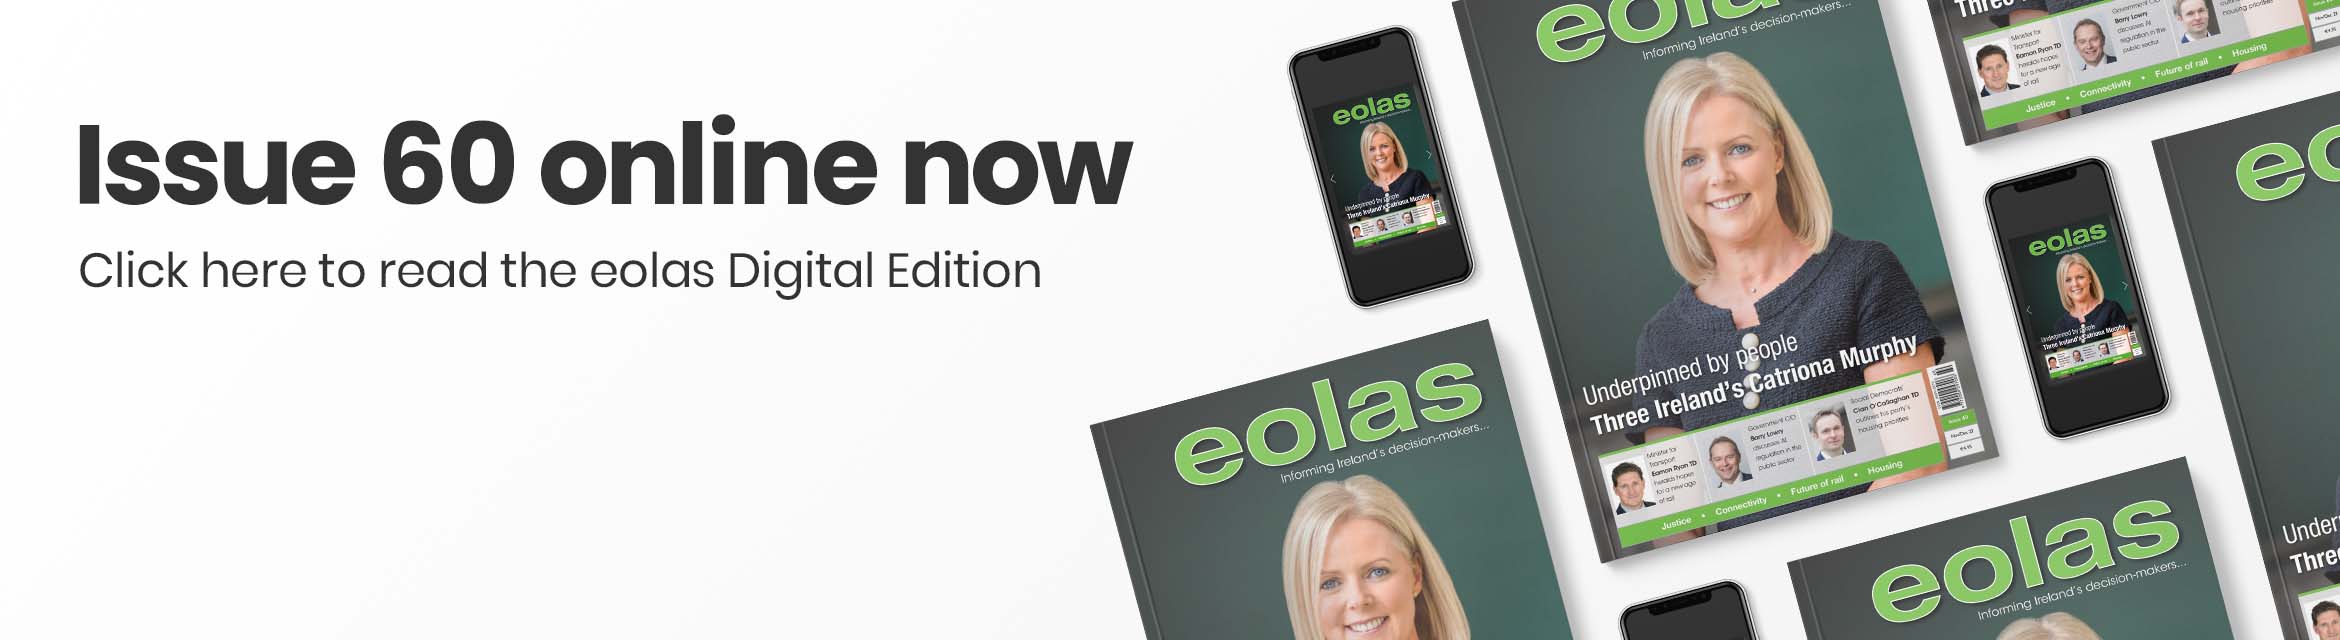 Issue 60 online now • Read the eolas Digital Edition